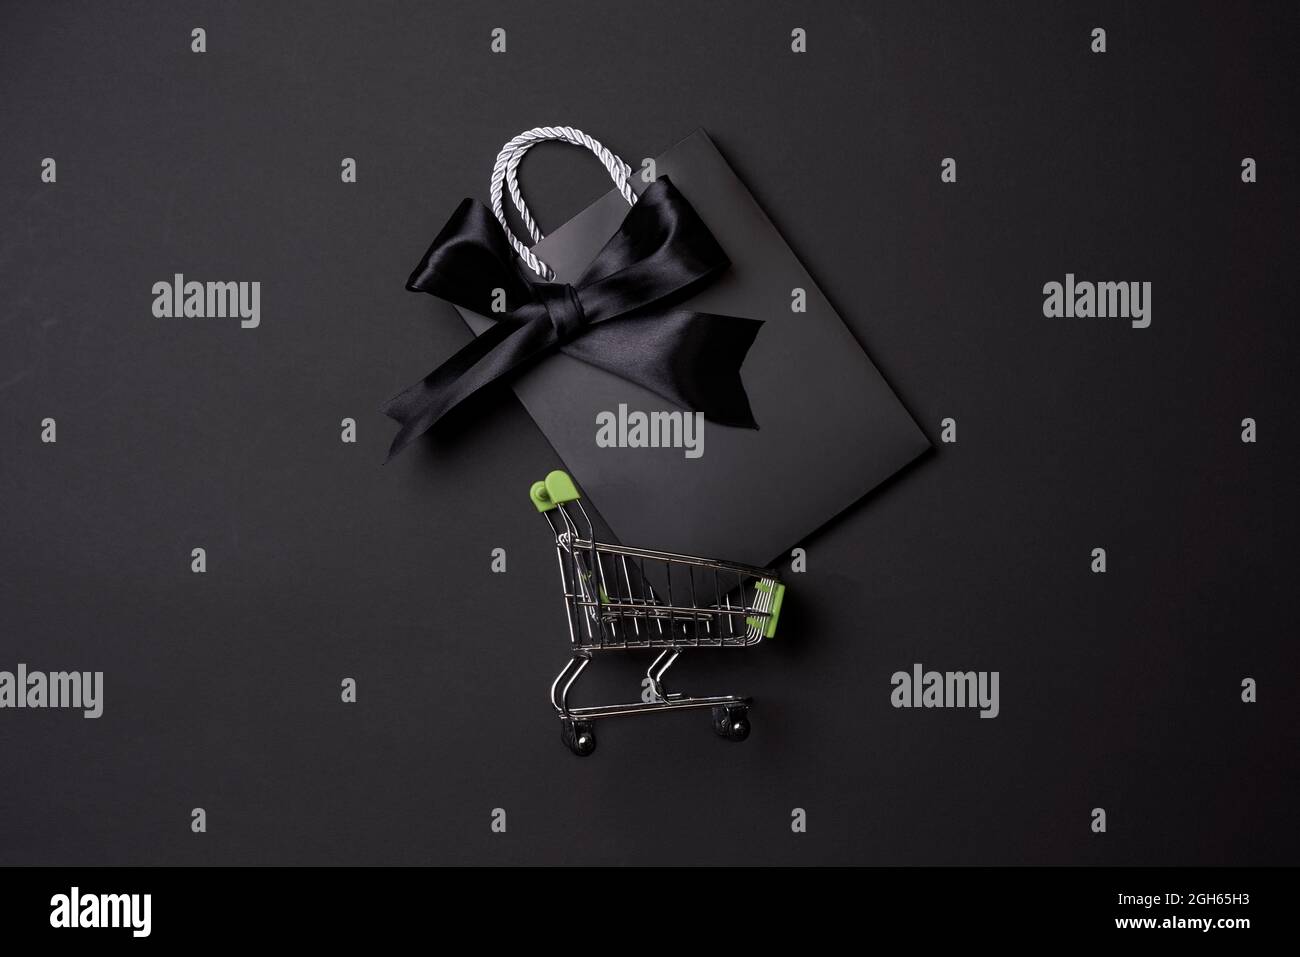 Black friday concept with shopping trolley on black background Stock Photo